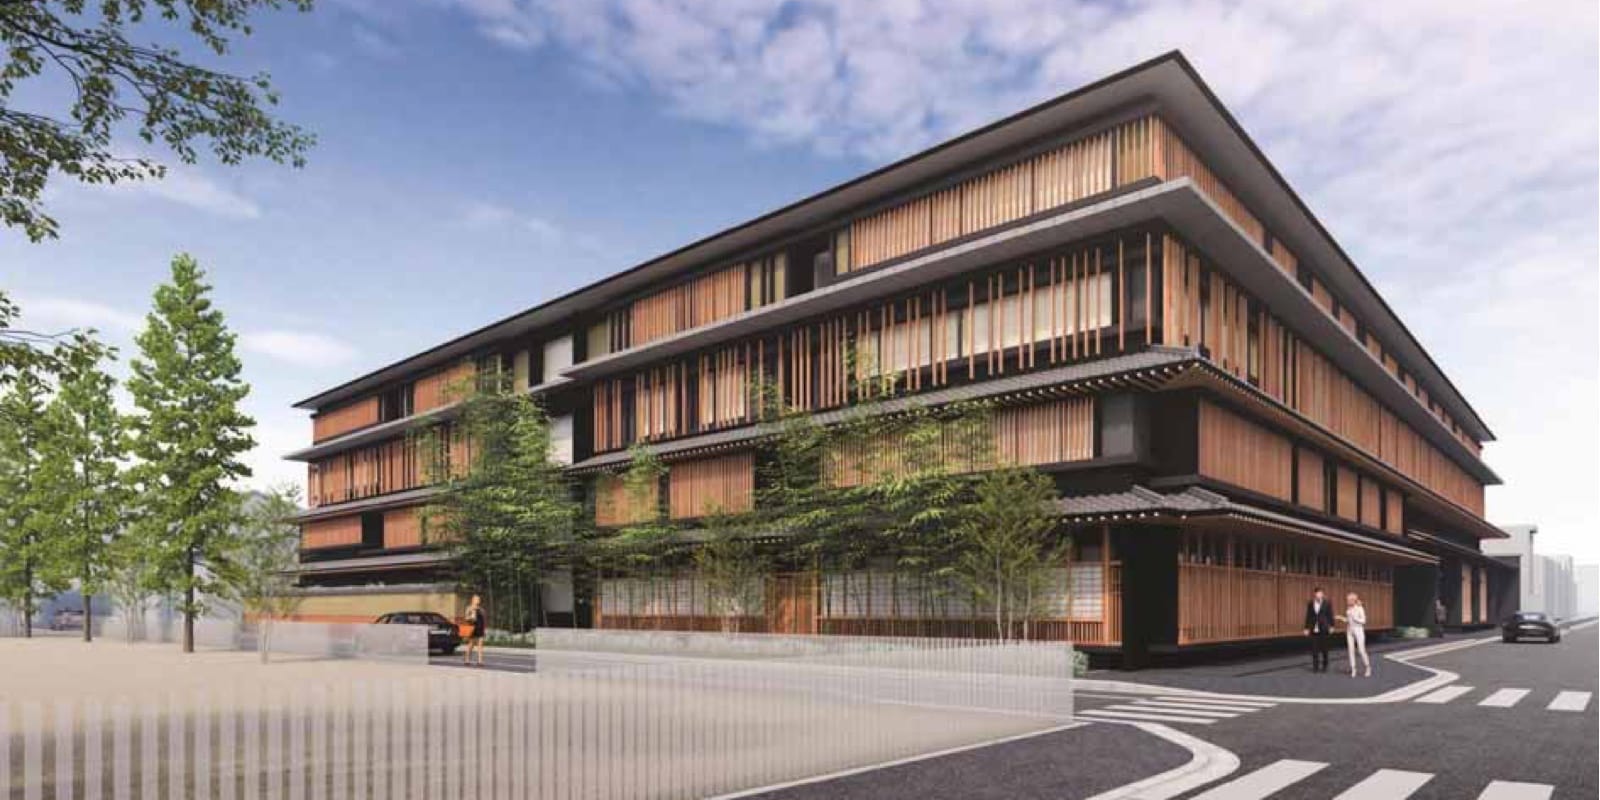 Thai Developers Expand in Japan with New Luxury Hotel in Kyoto